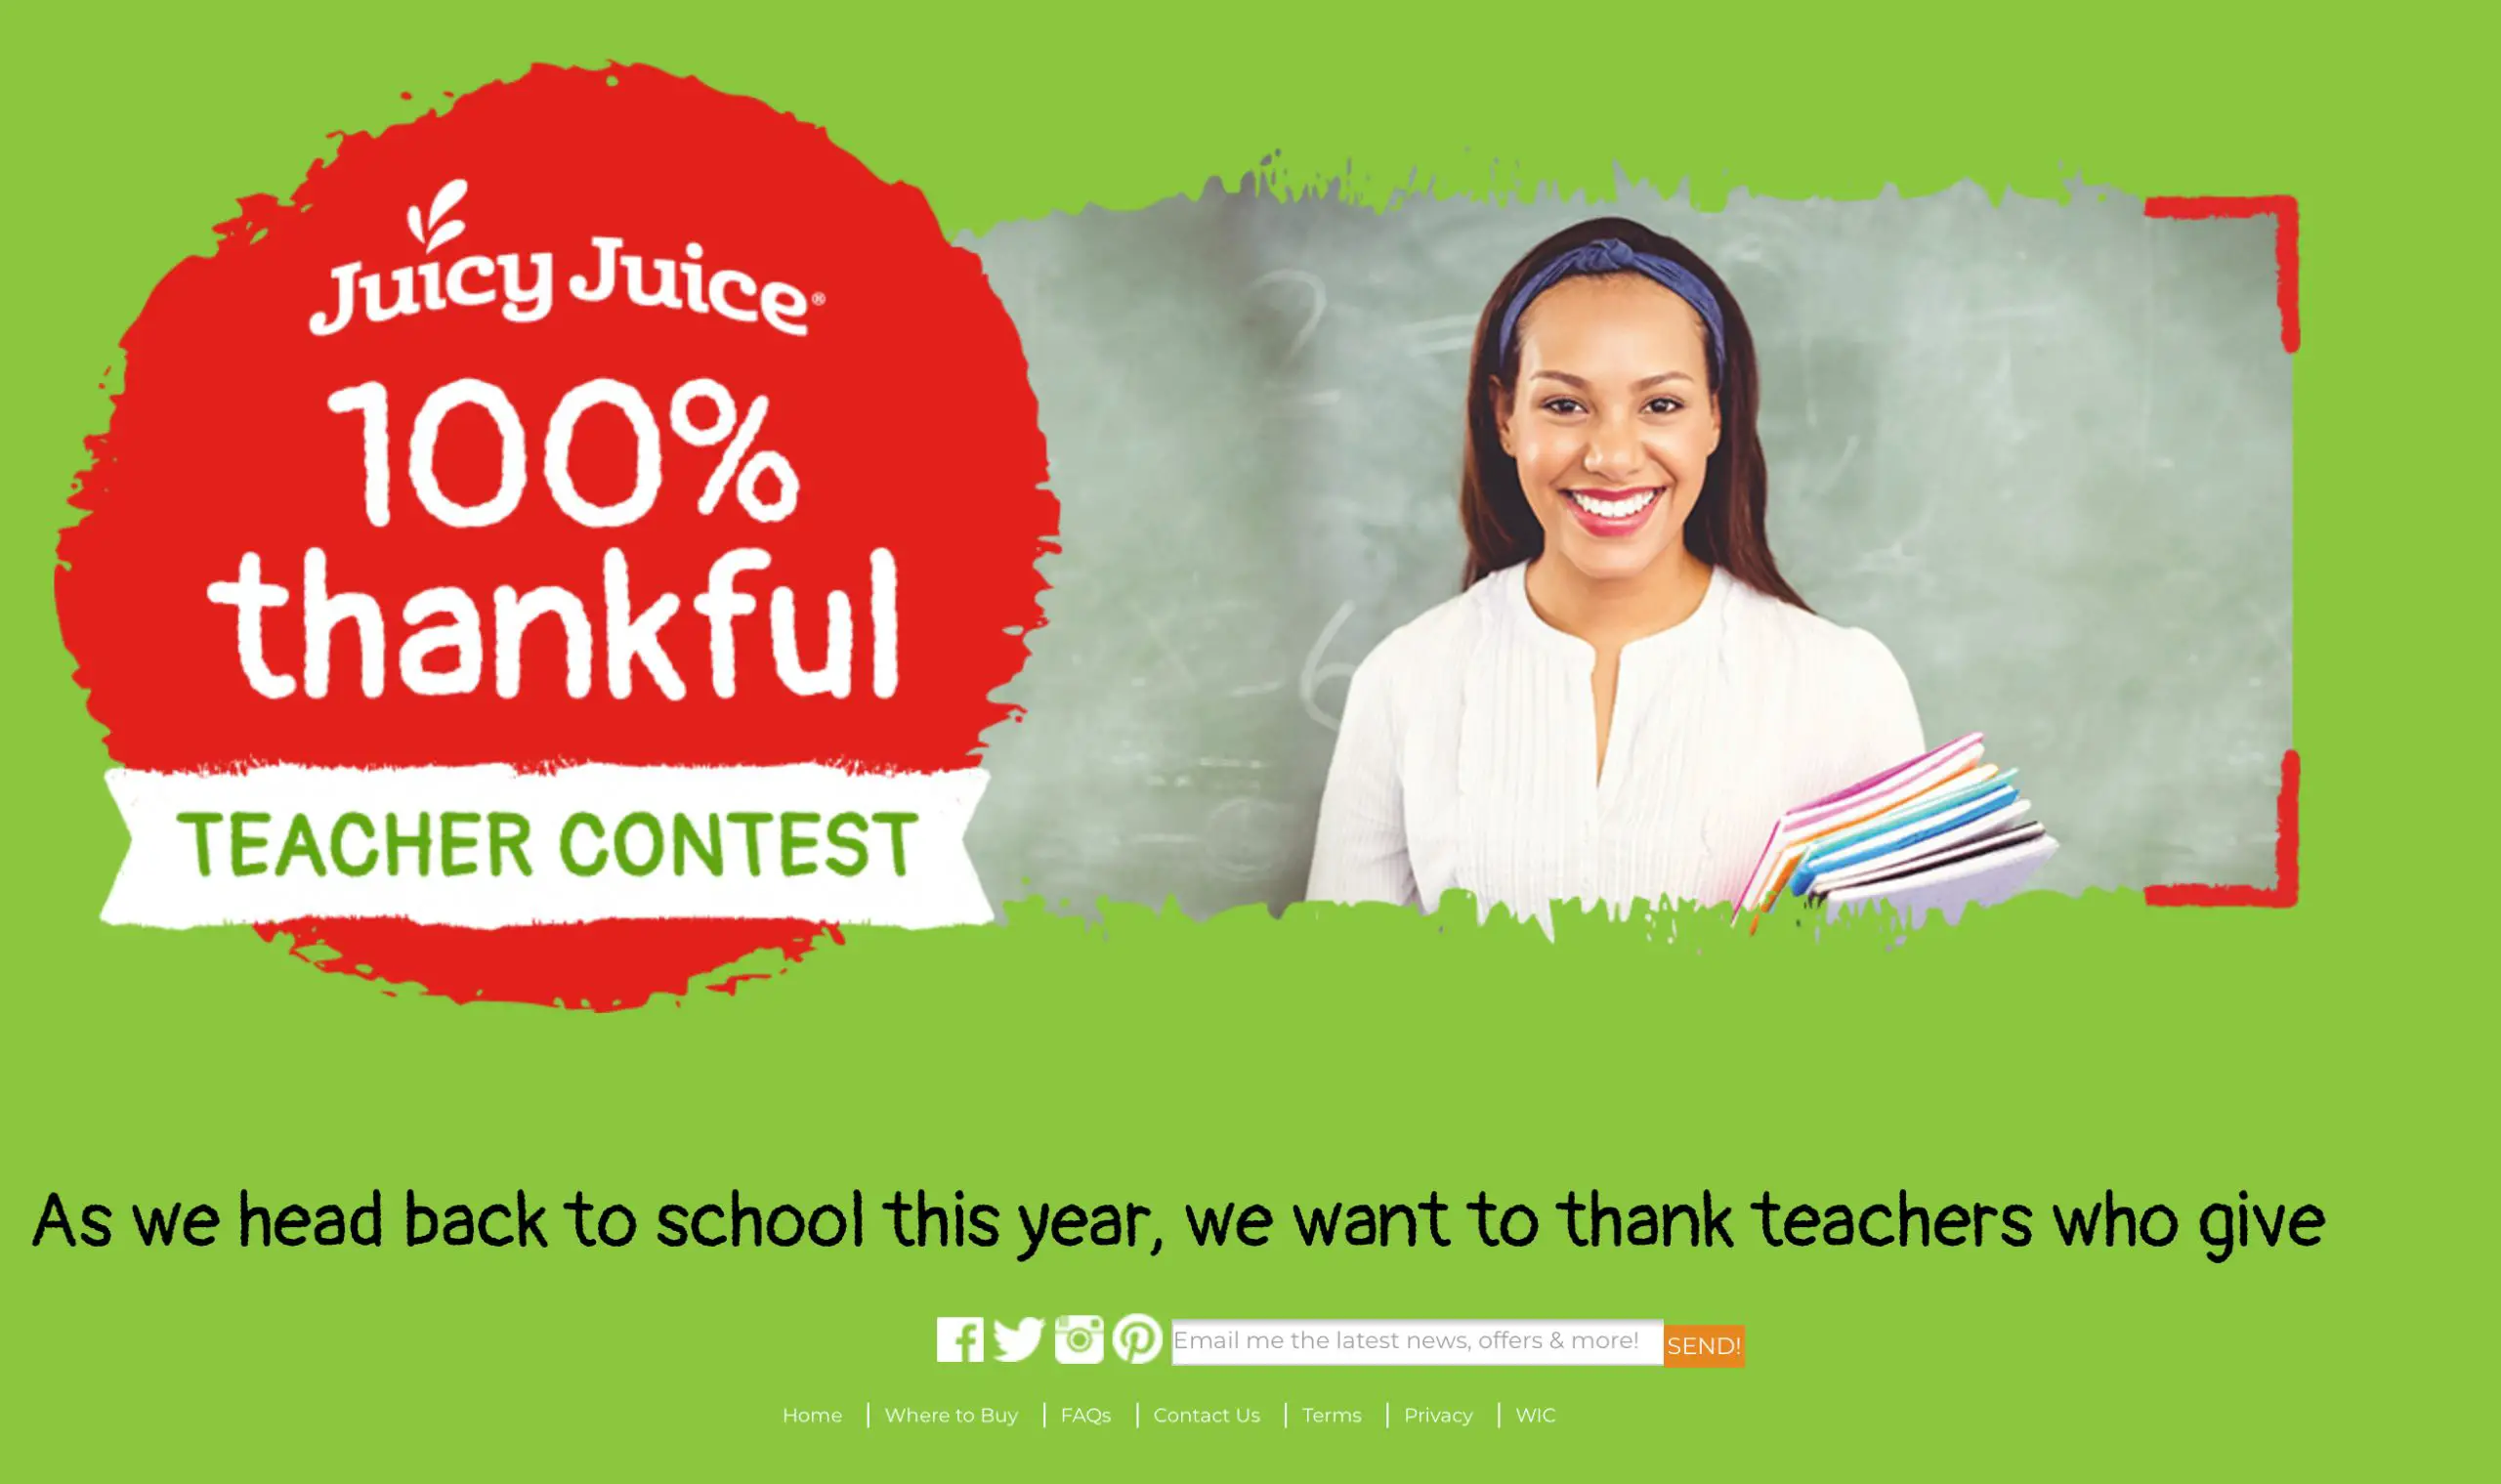 As we head back to school this year, we want to thank teachers who give 100% in and out of the classroom. Nominate your child’s teacher today! Over $30,000 available in prizes!!